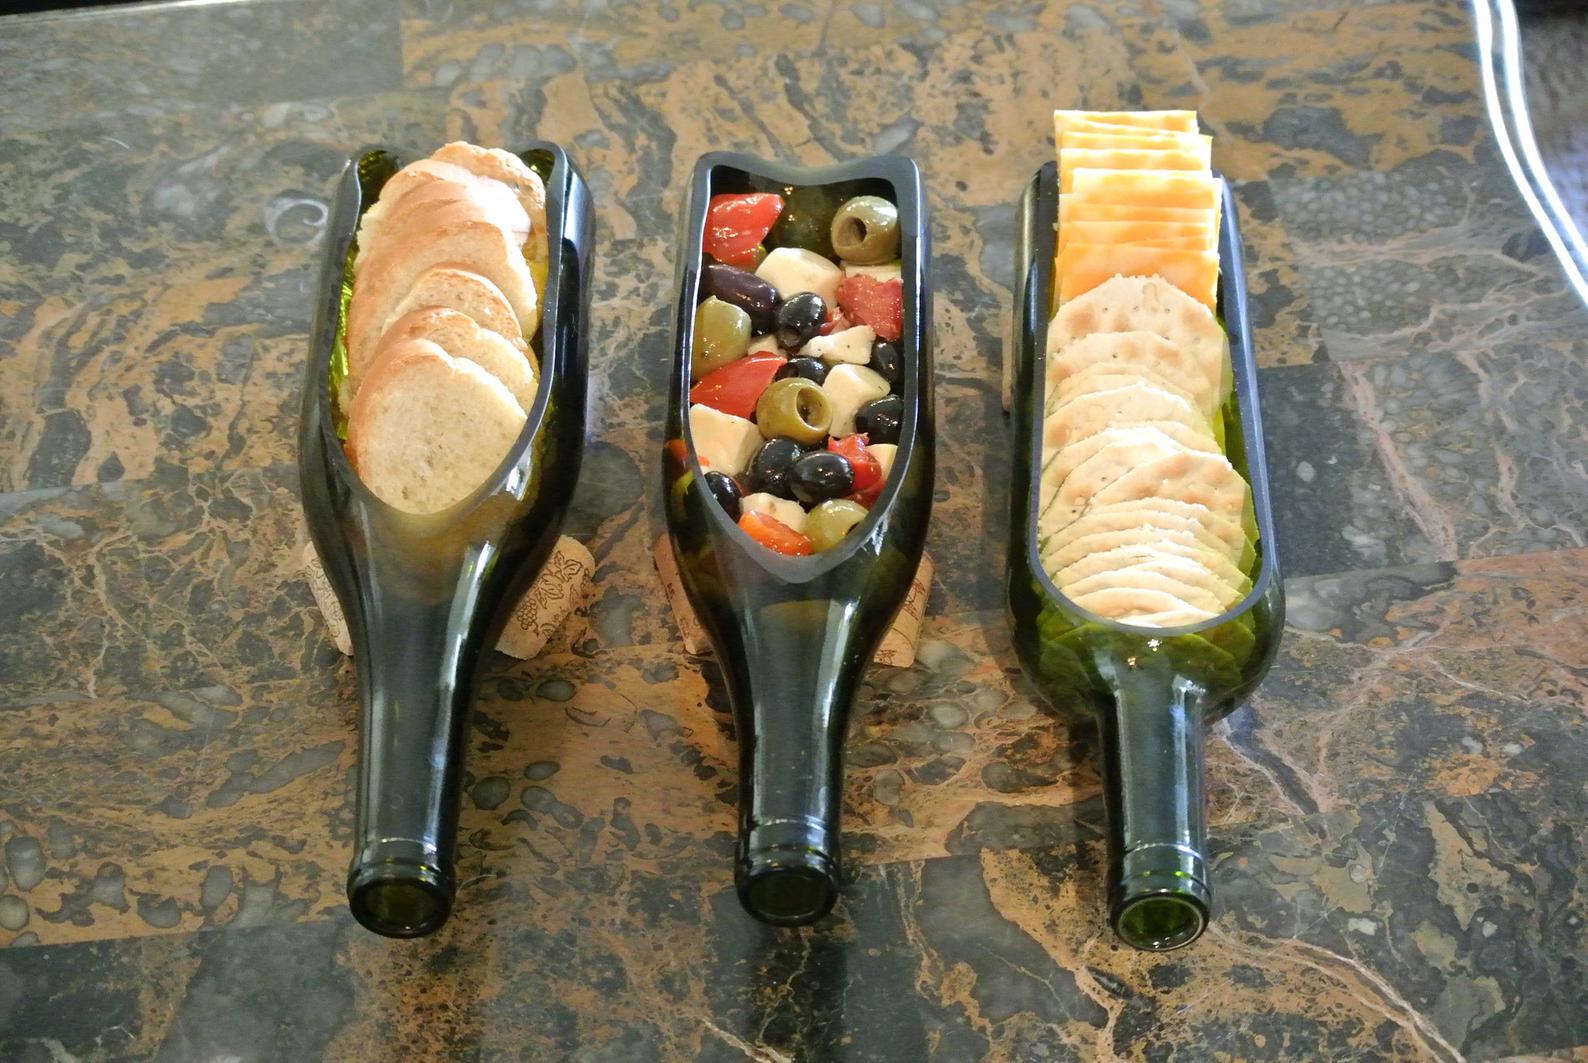 Three wine bottles cut in half lengthwise and laying down holding crackers or olives